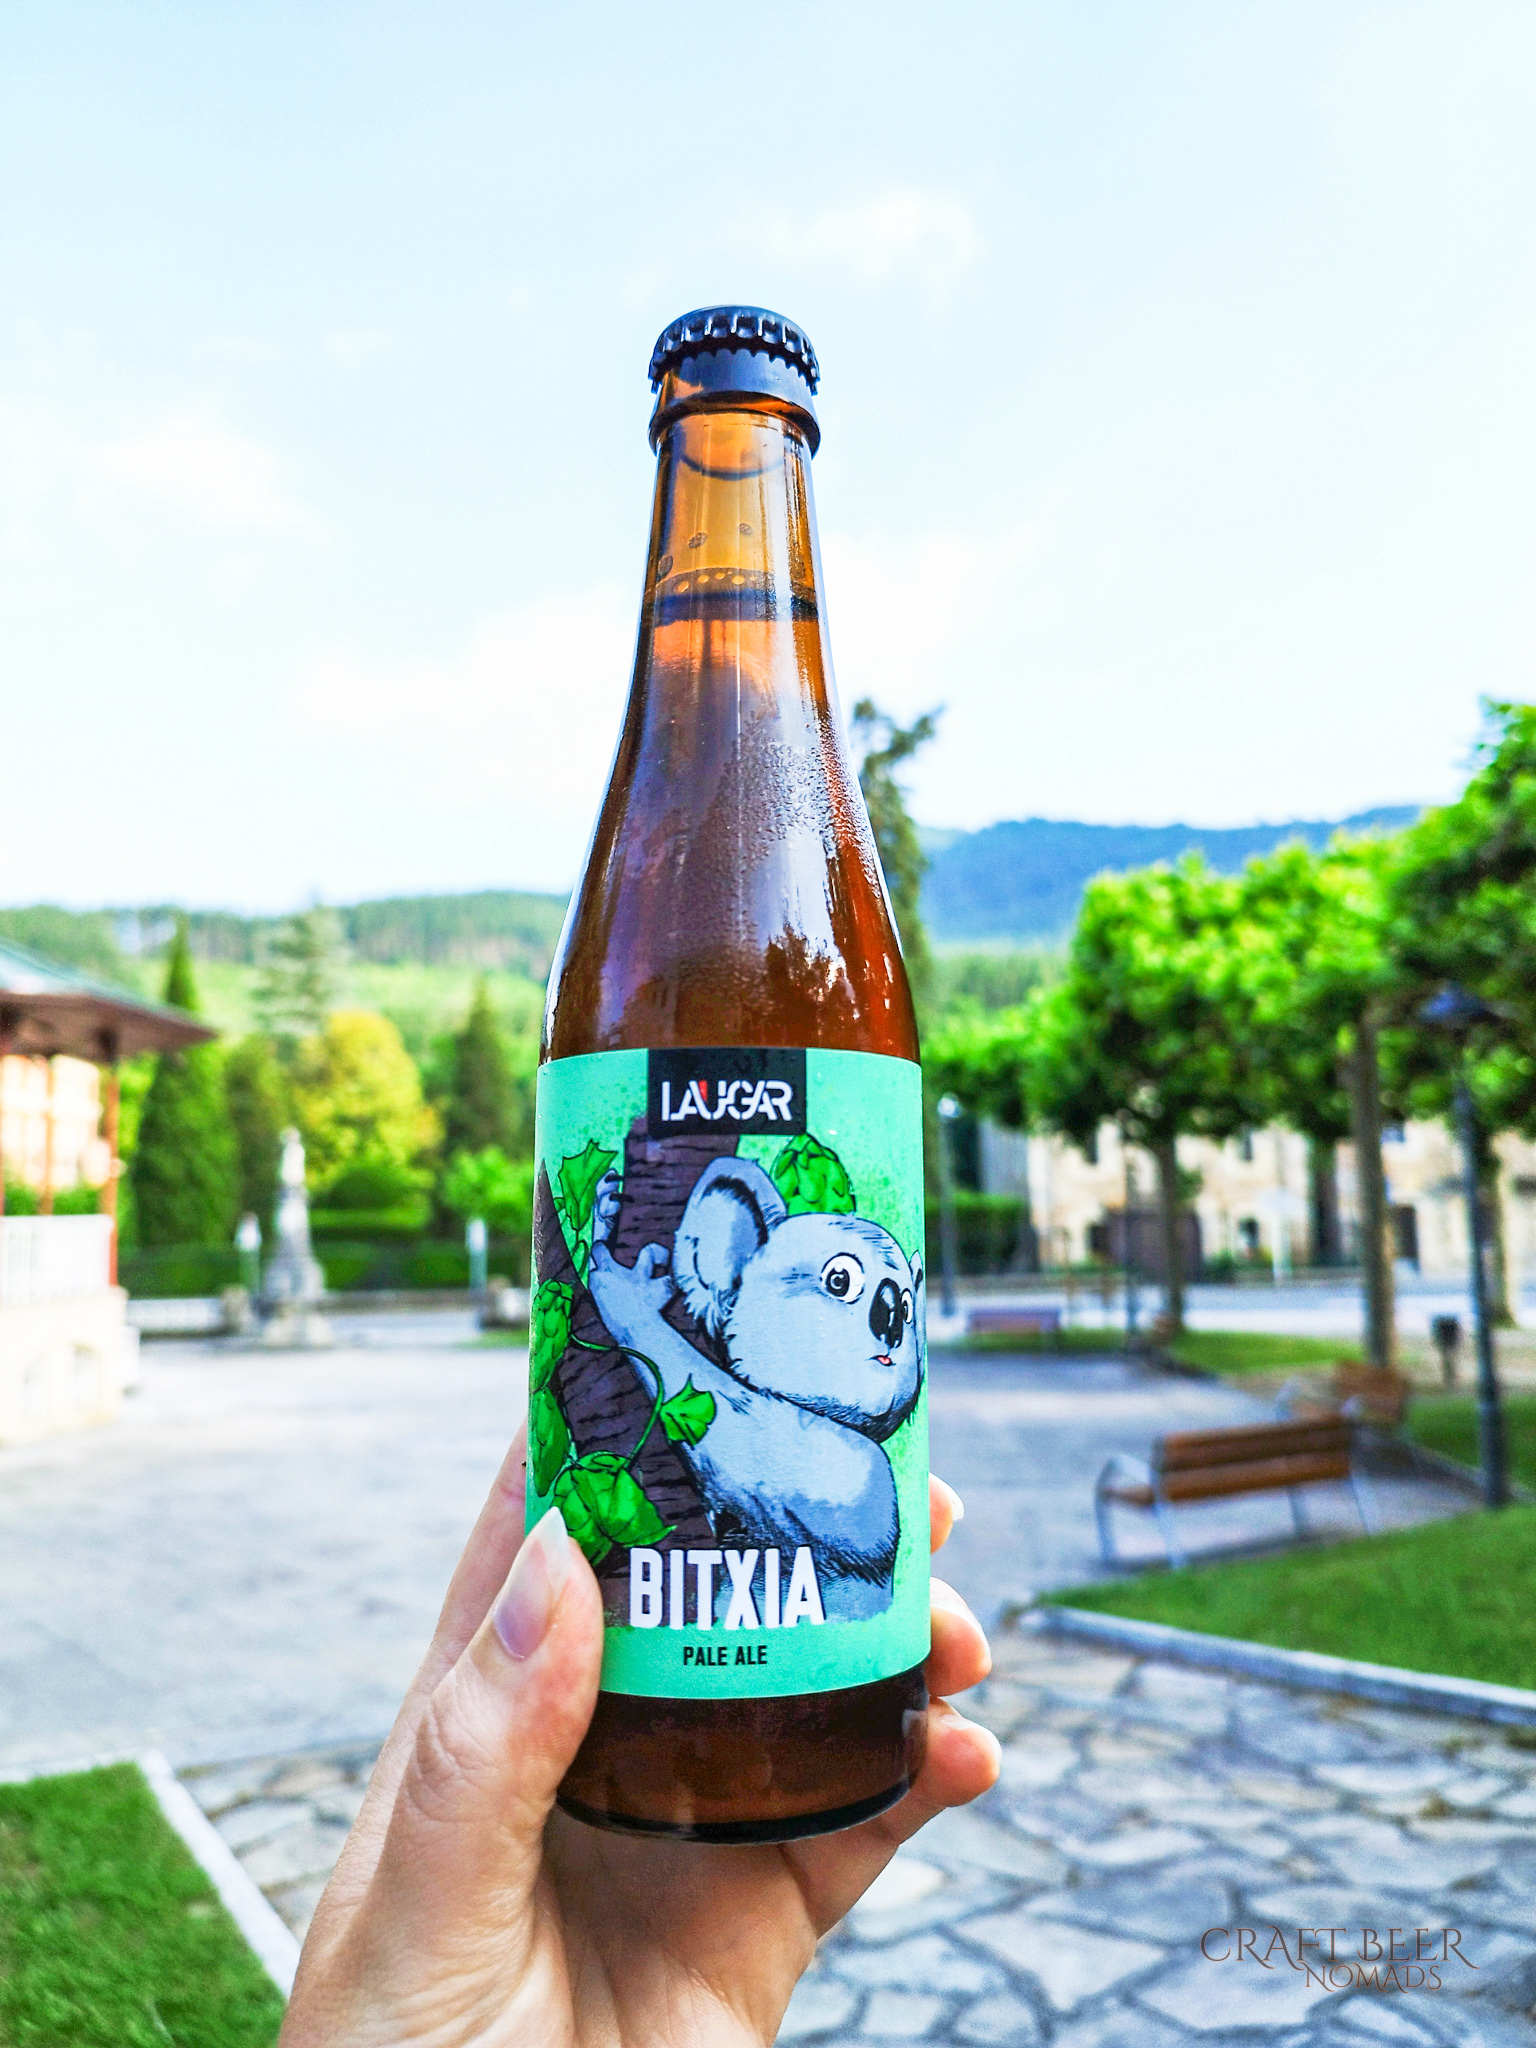 Bitxia Pale Ale | Craft Beer in the Basque Country: Laugar Brewery | Craft Beer Nomads